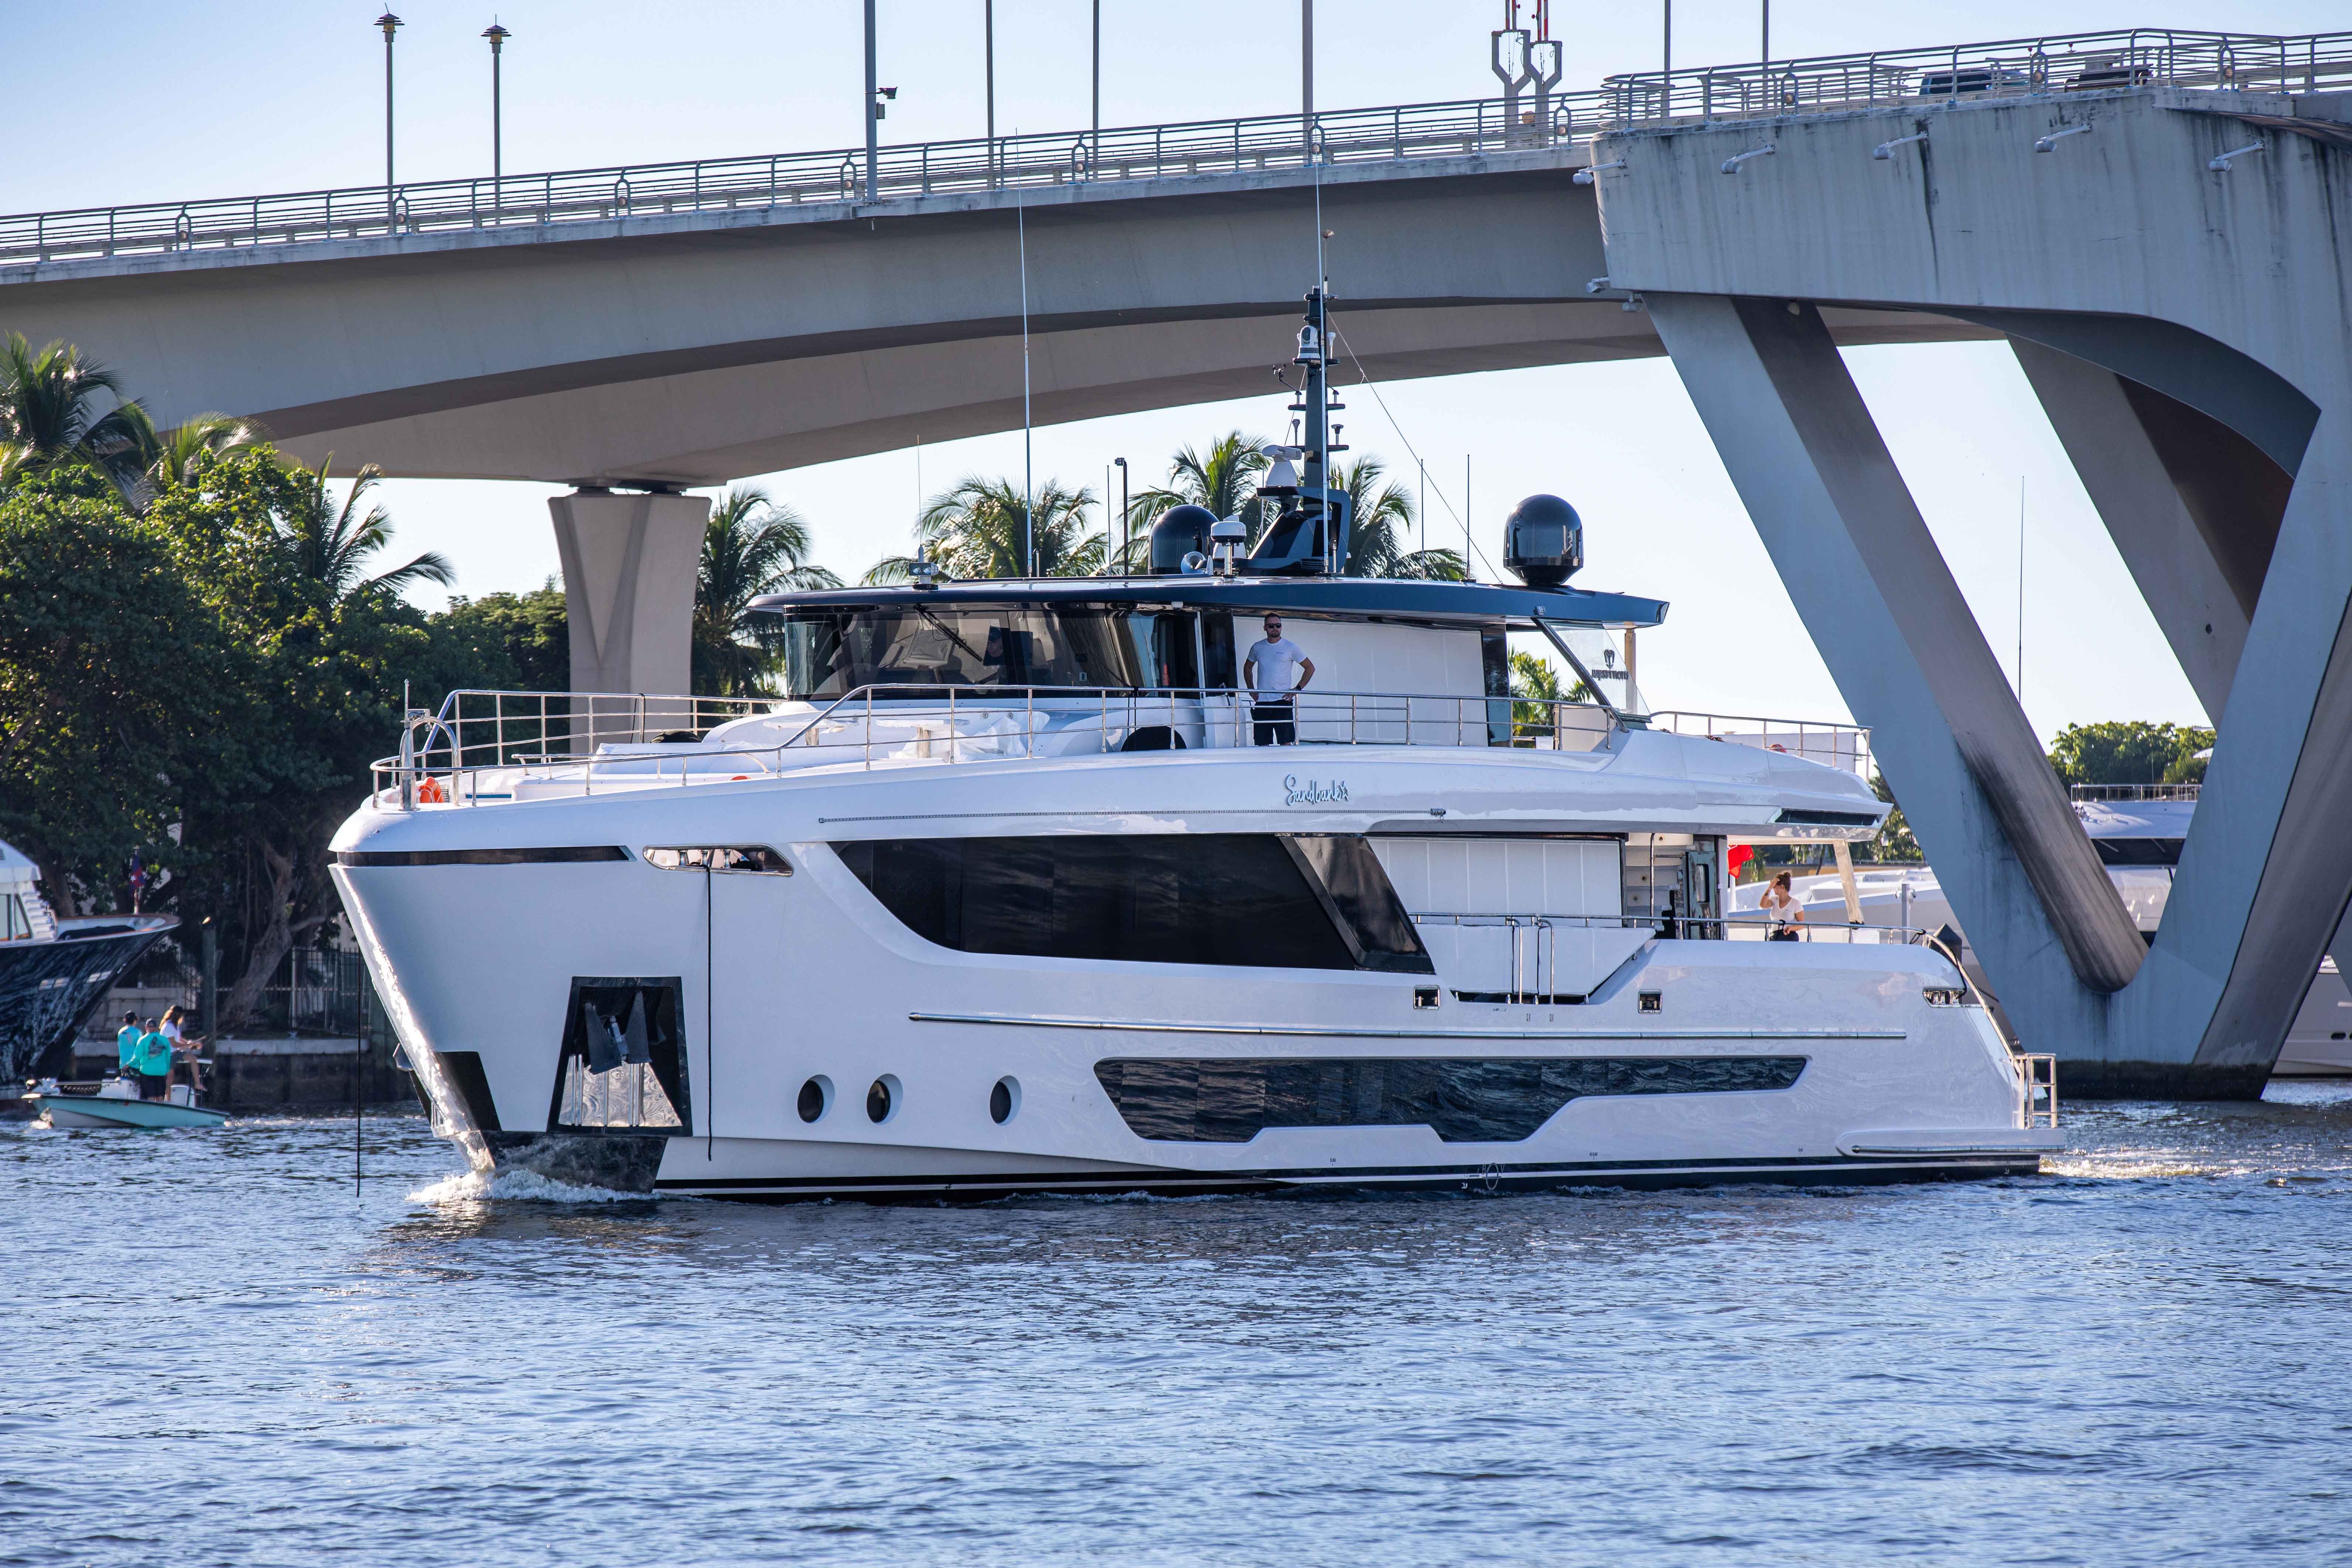 Majesty 111 - Arrival at FLIBS 3